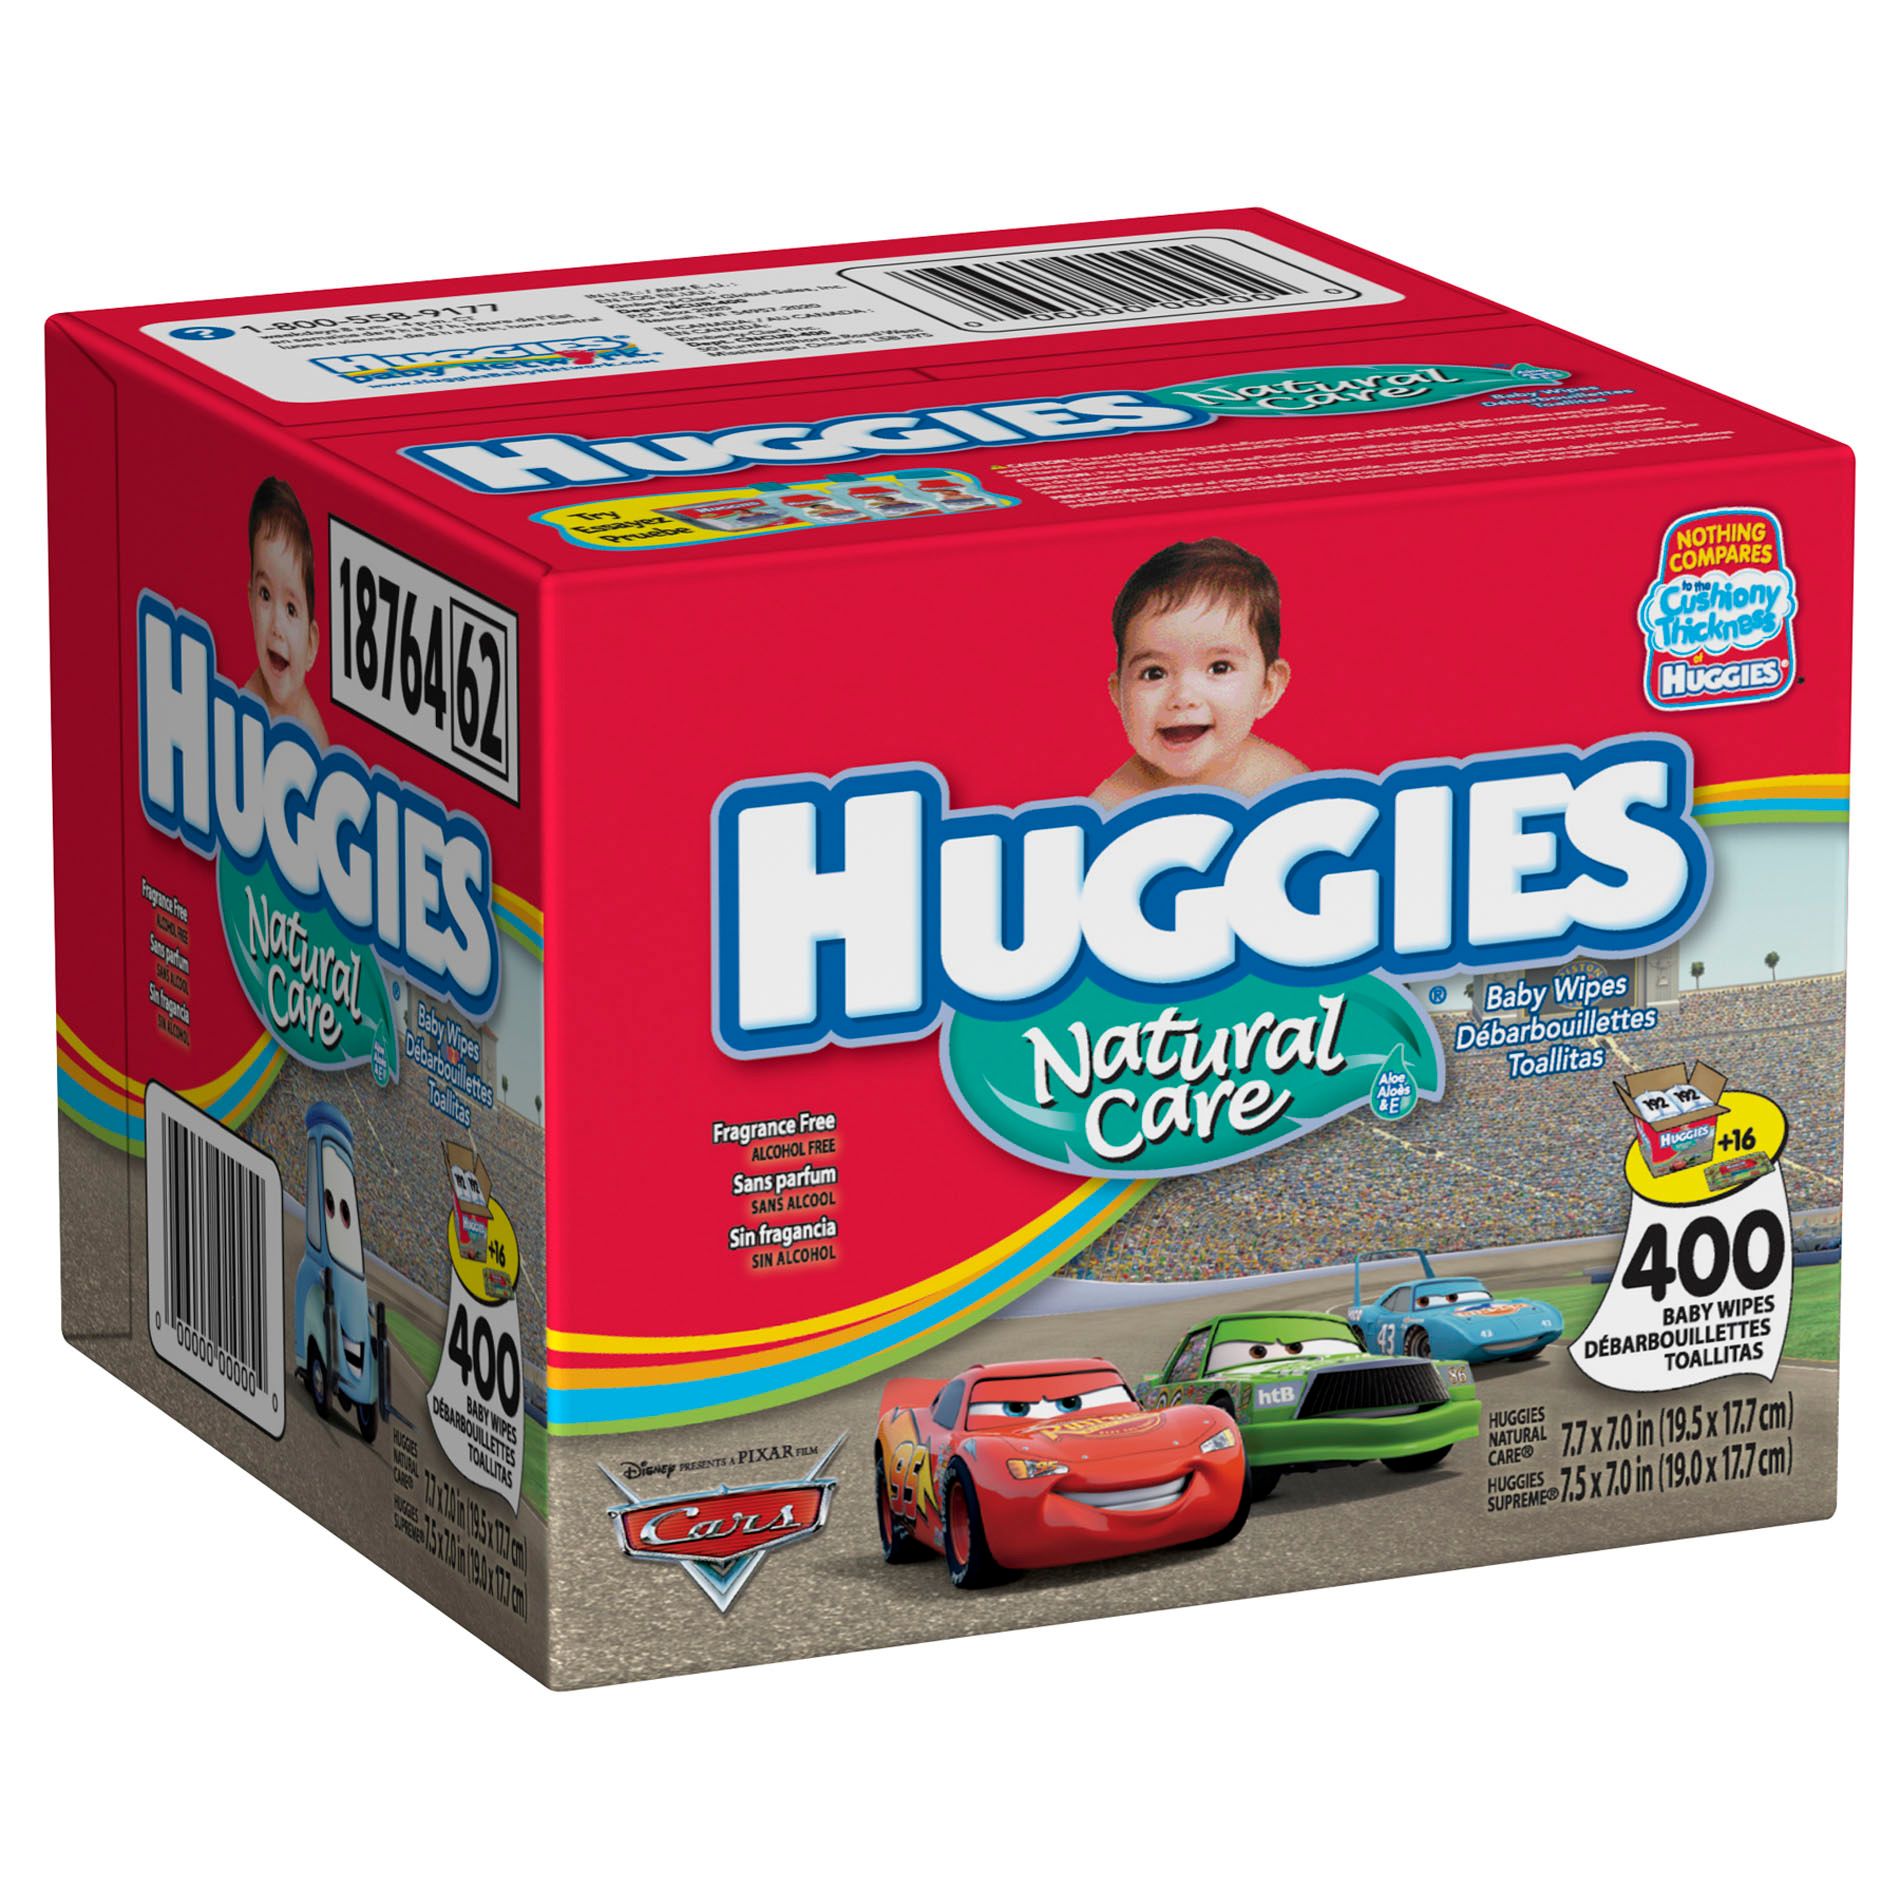 Huggies Natural Care Aloe & E Baby Wipes, Disney Pixar Cars, Unscented, 400 wipes